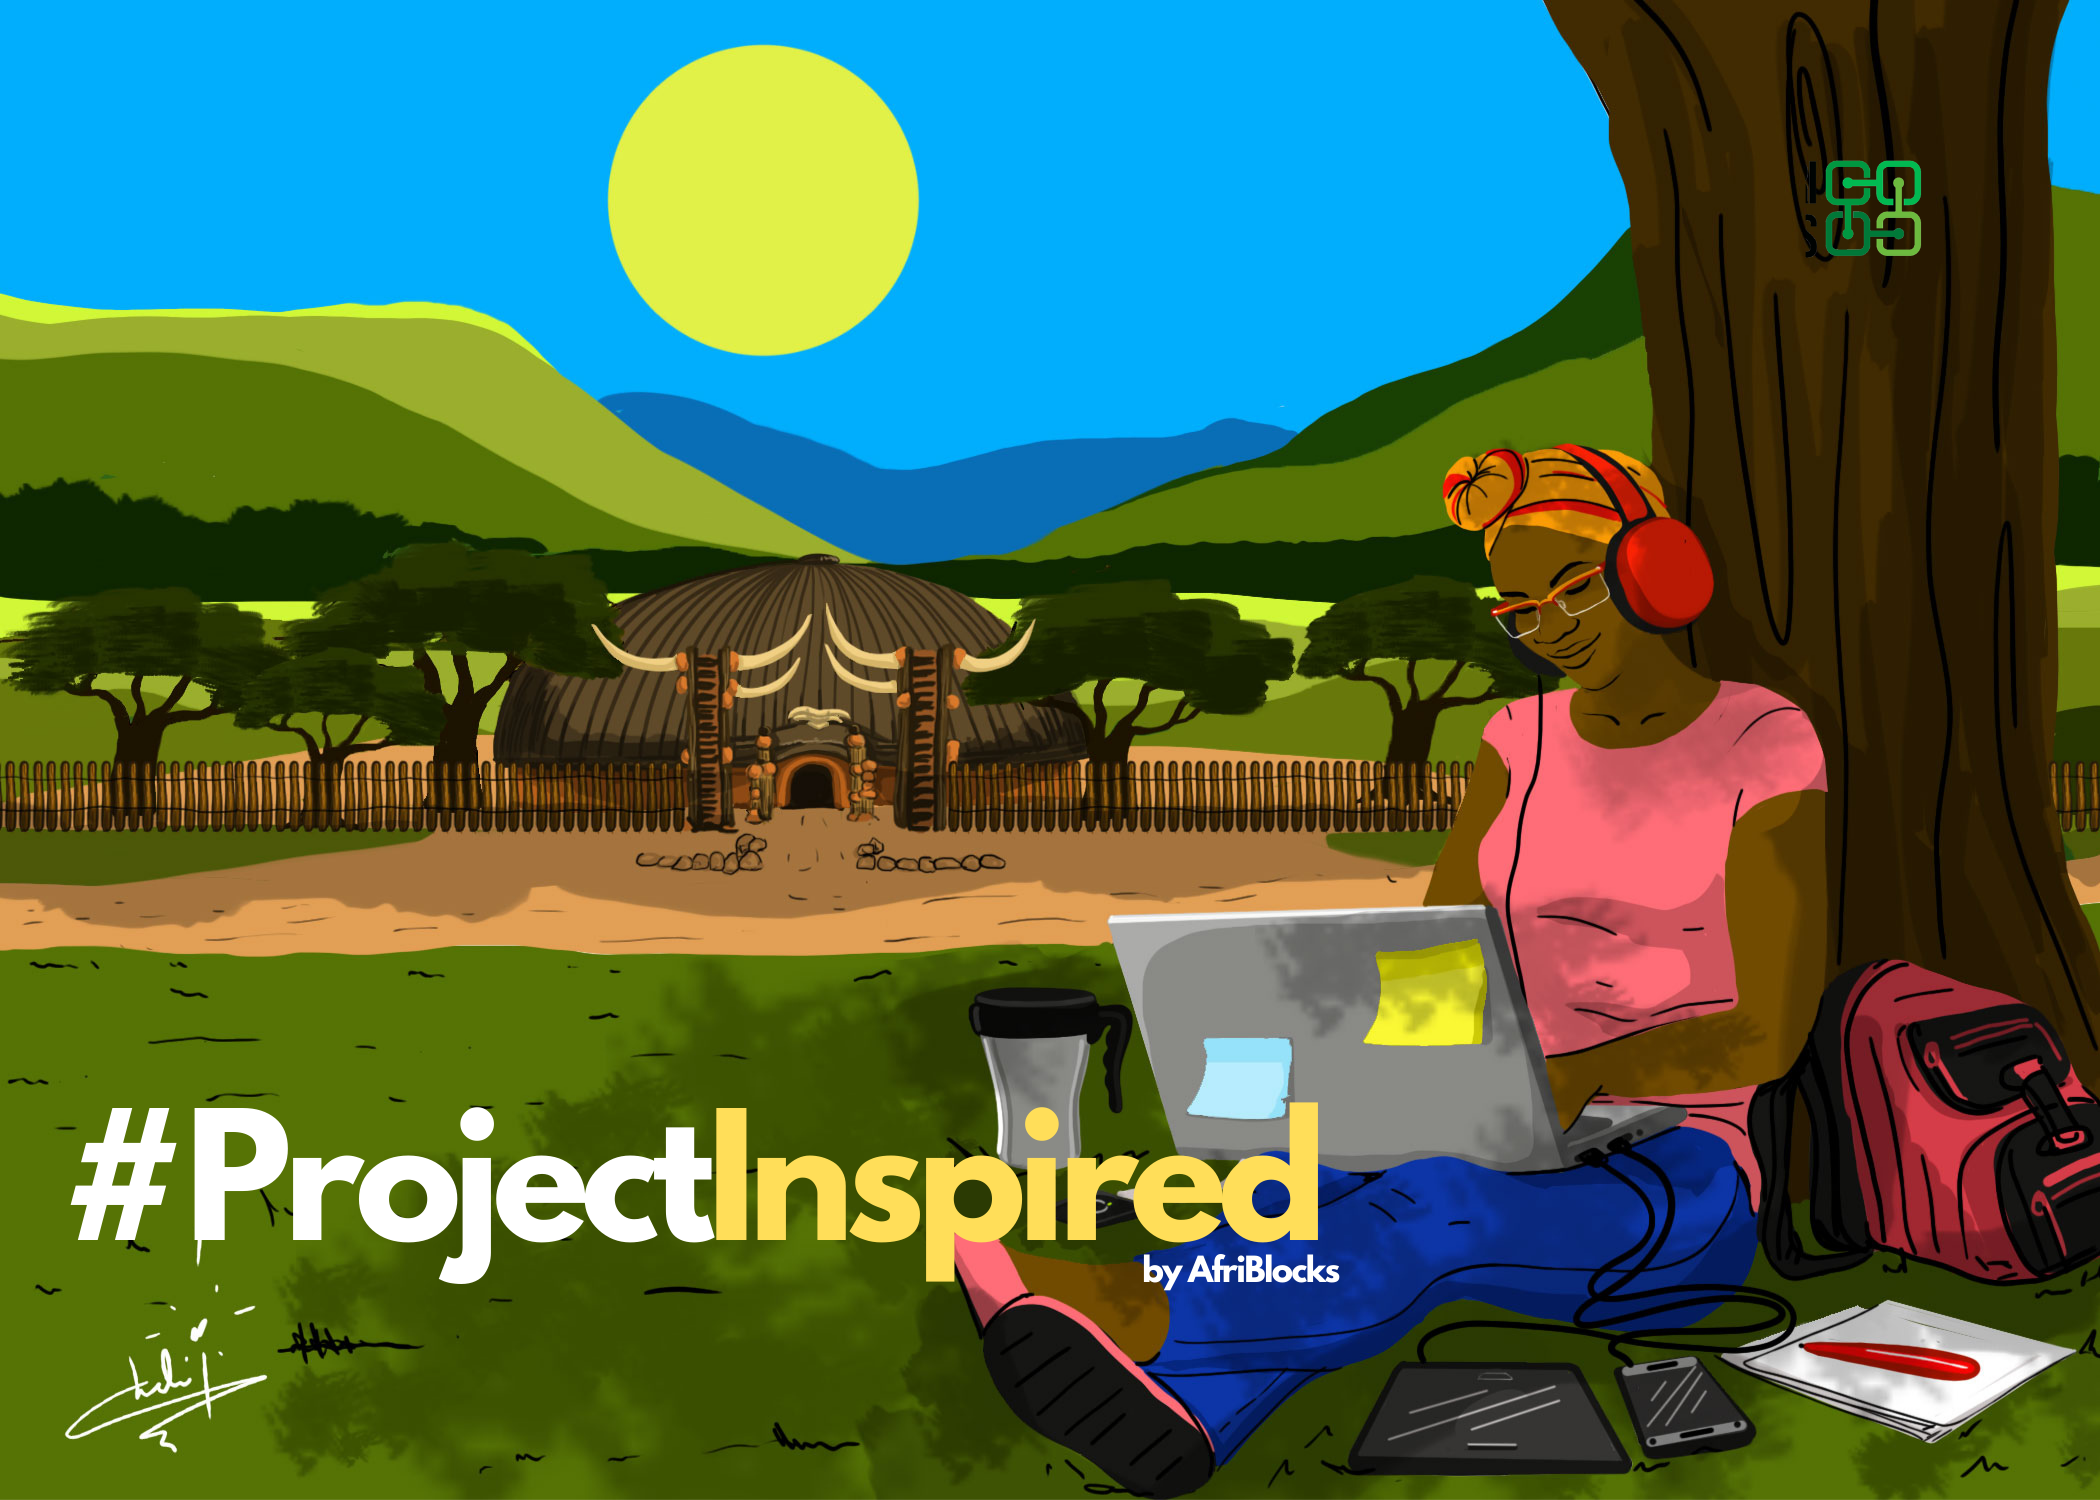 #ProjectInspired by #AfriBlocks #1